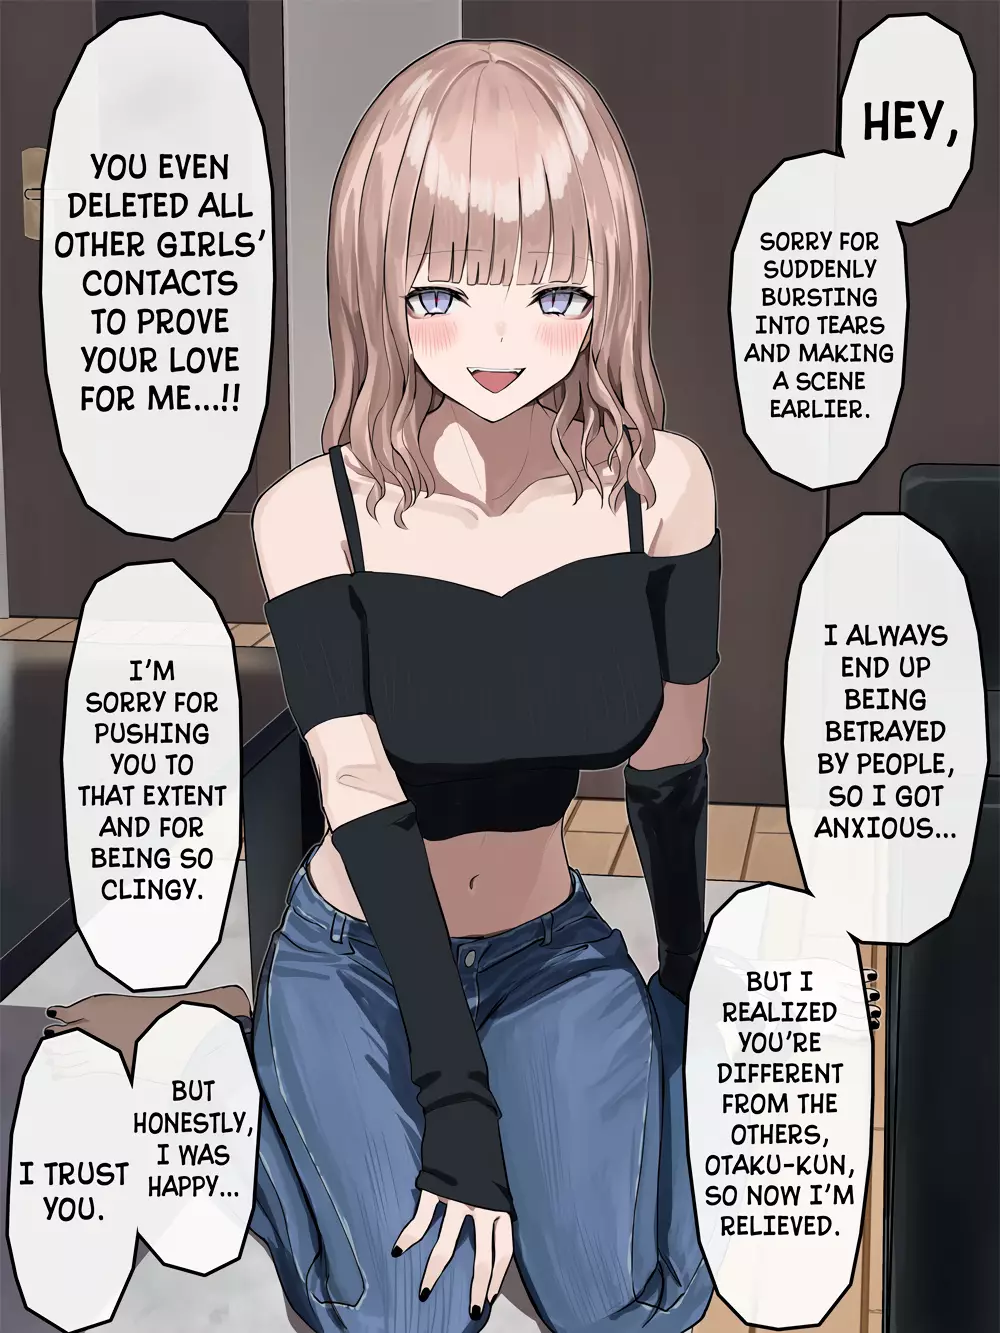 A Tsundere Gal Is Becoming Cuter Day By Day - 10 page 1-1340eb12